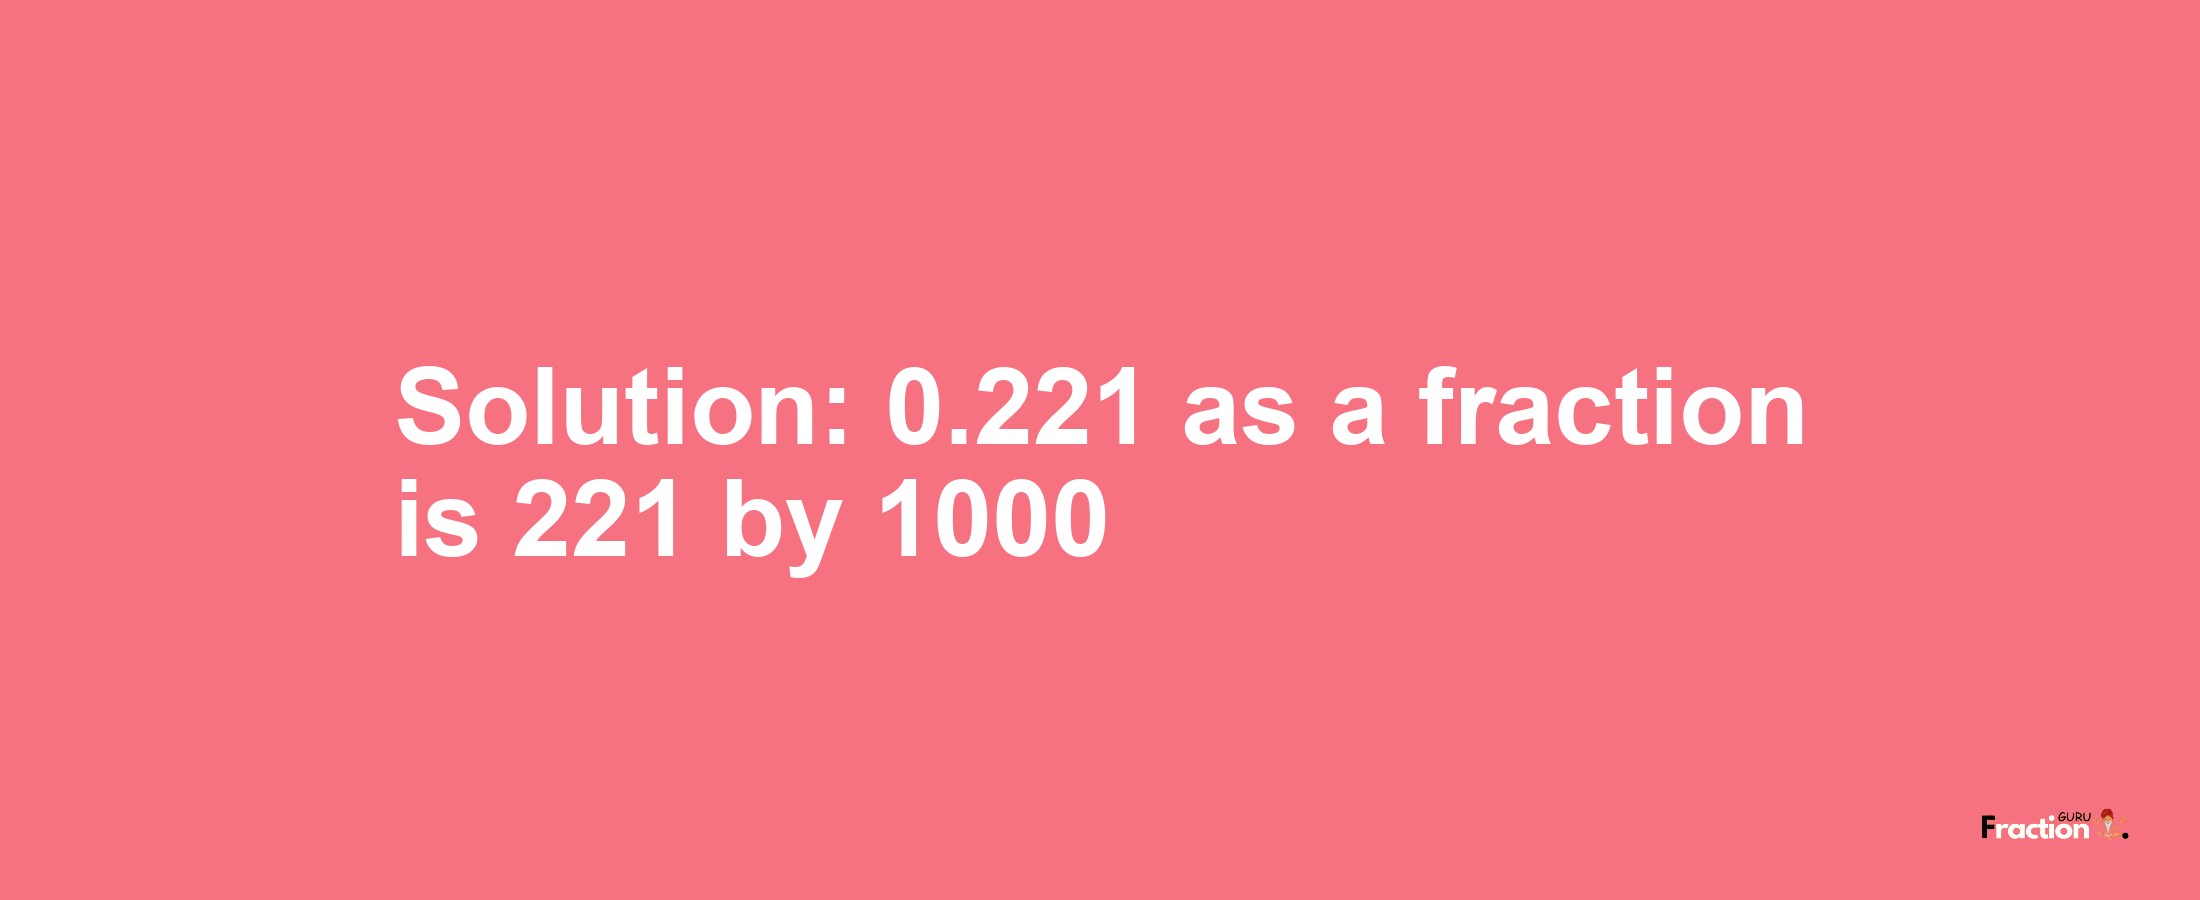 Solution:0.221 as a fraction is 221/1000